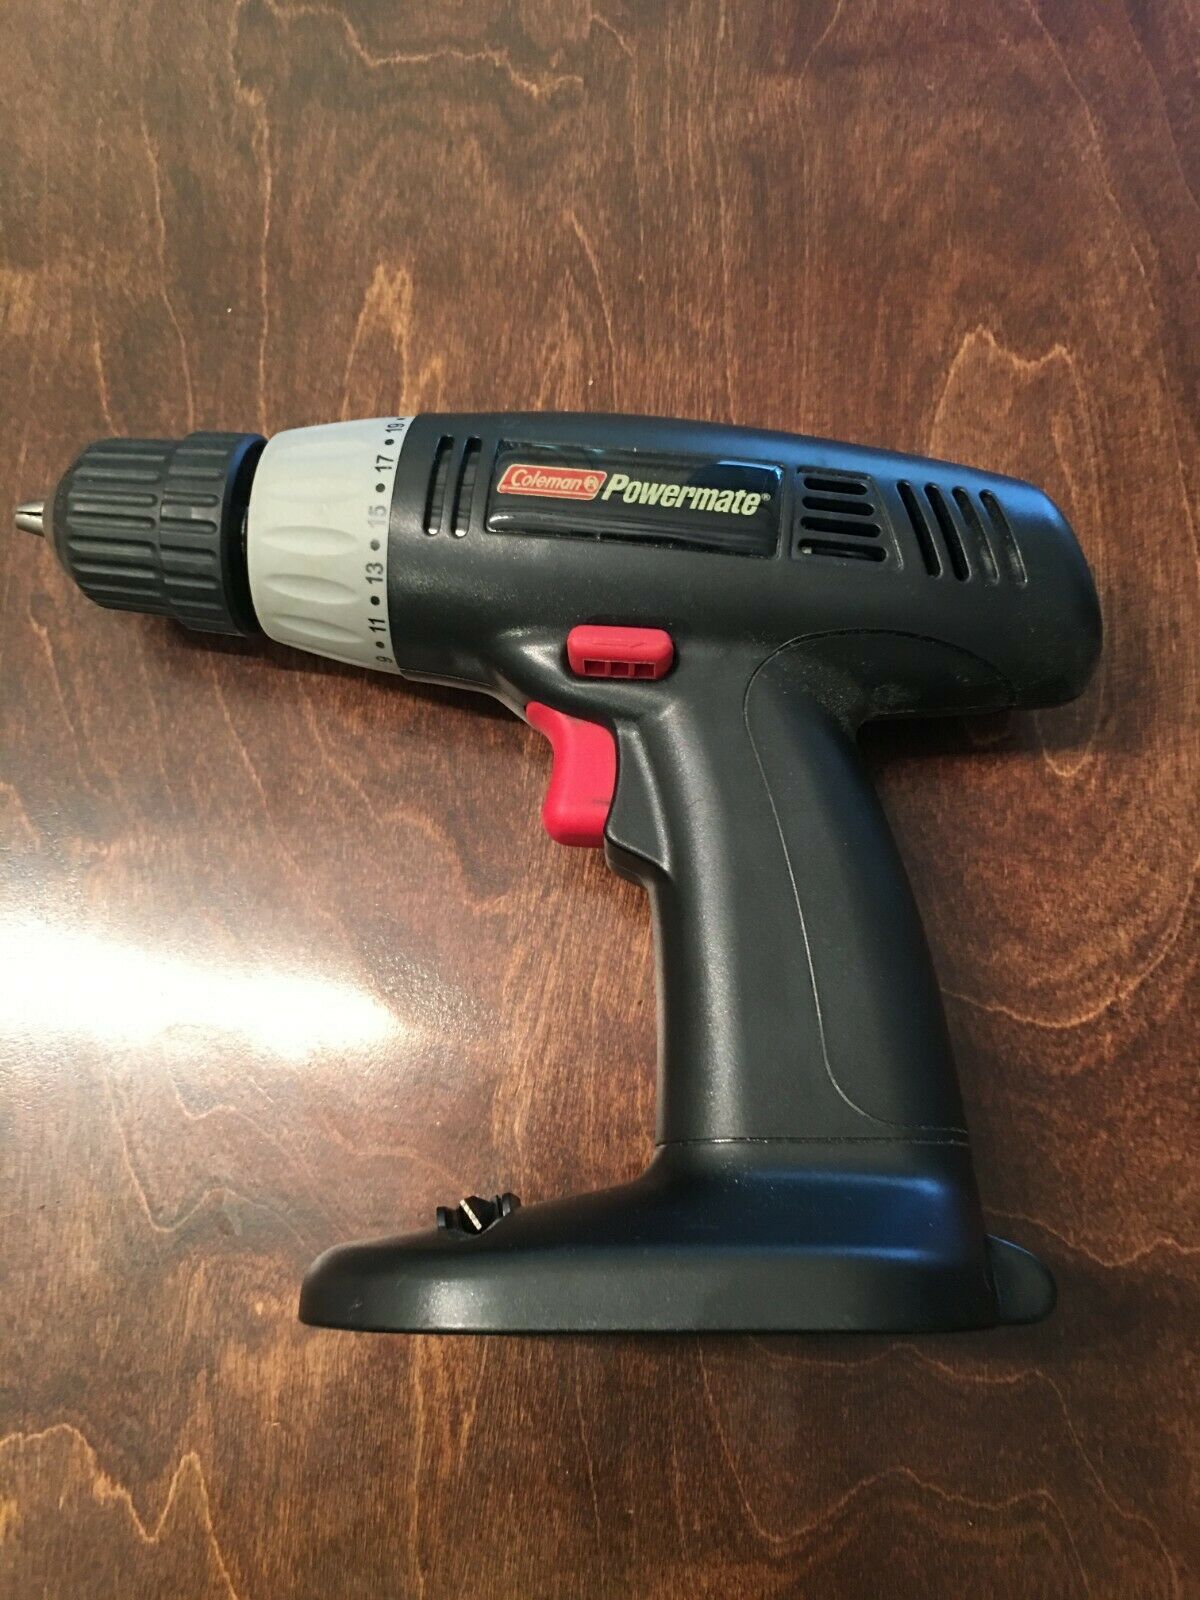 COLEMAN PMD8127 12V Cordless Drill excellent condition - $12.87